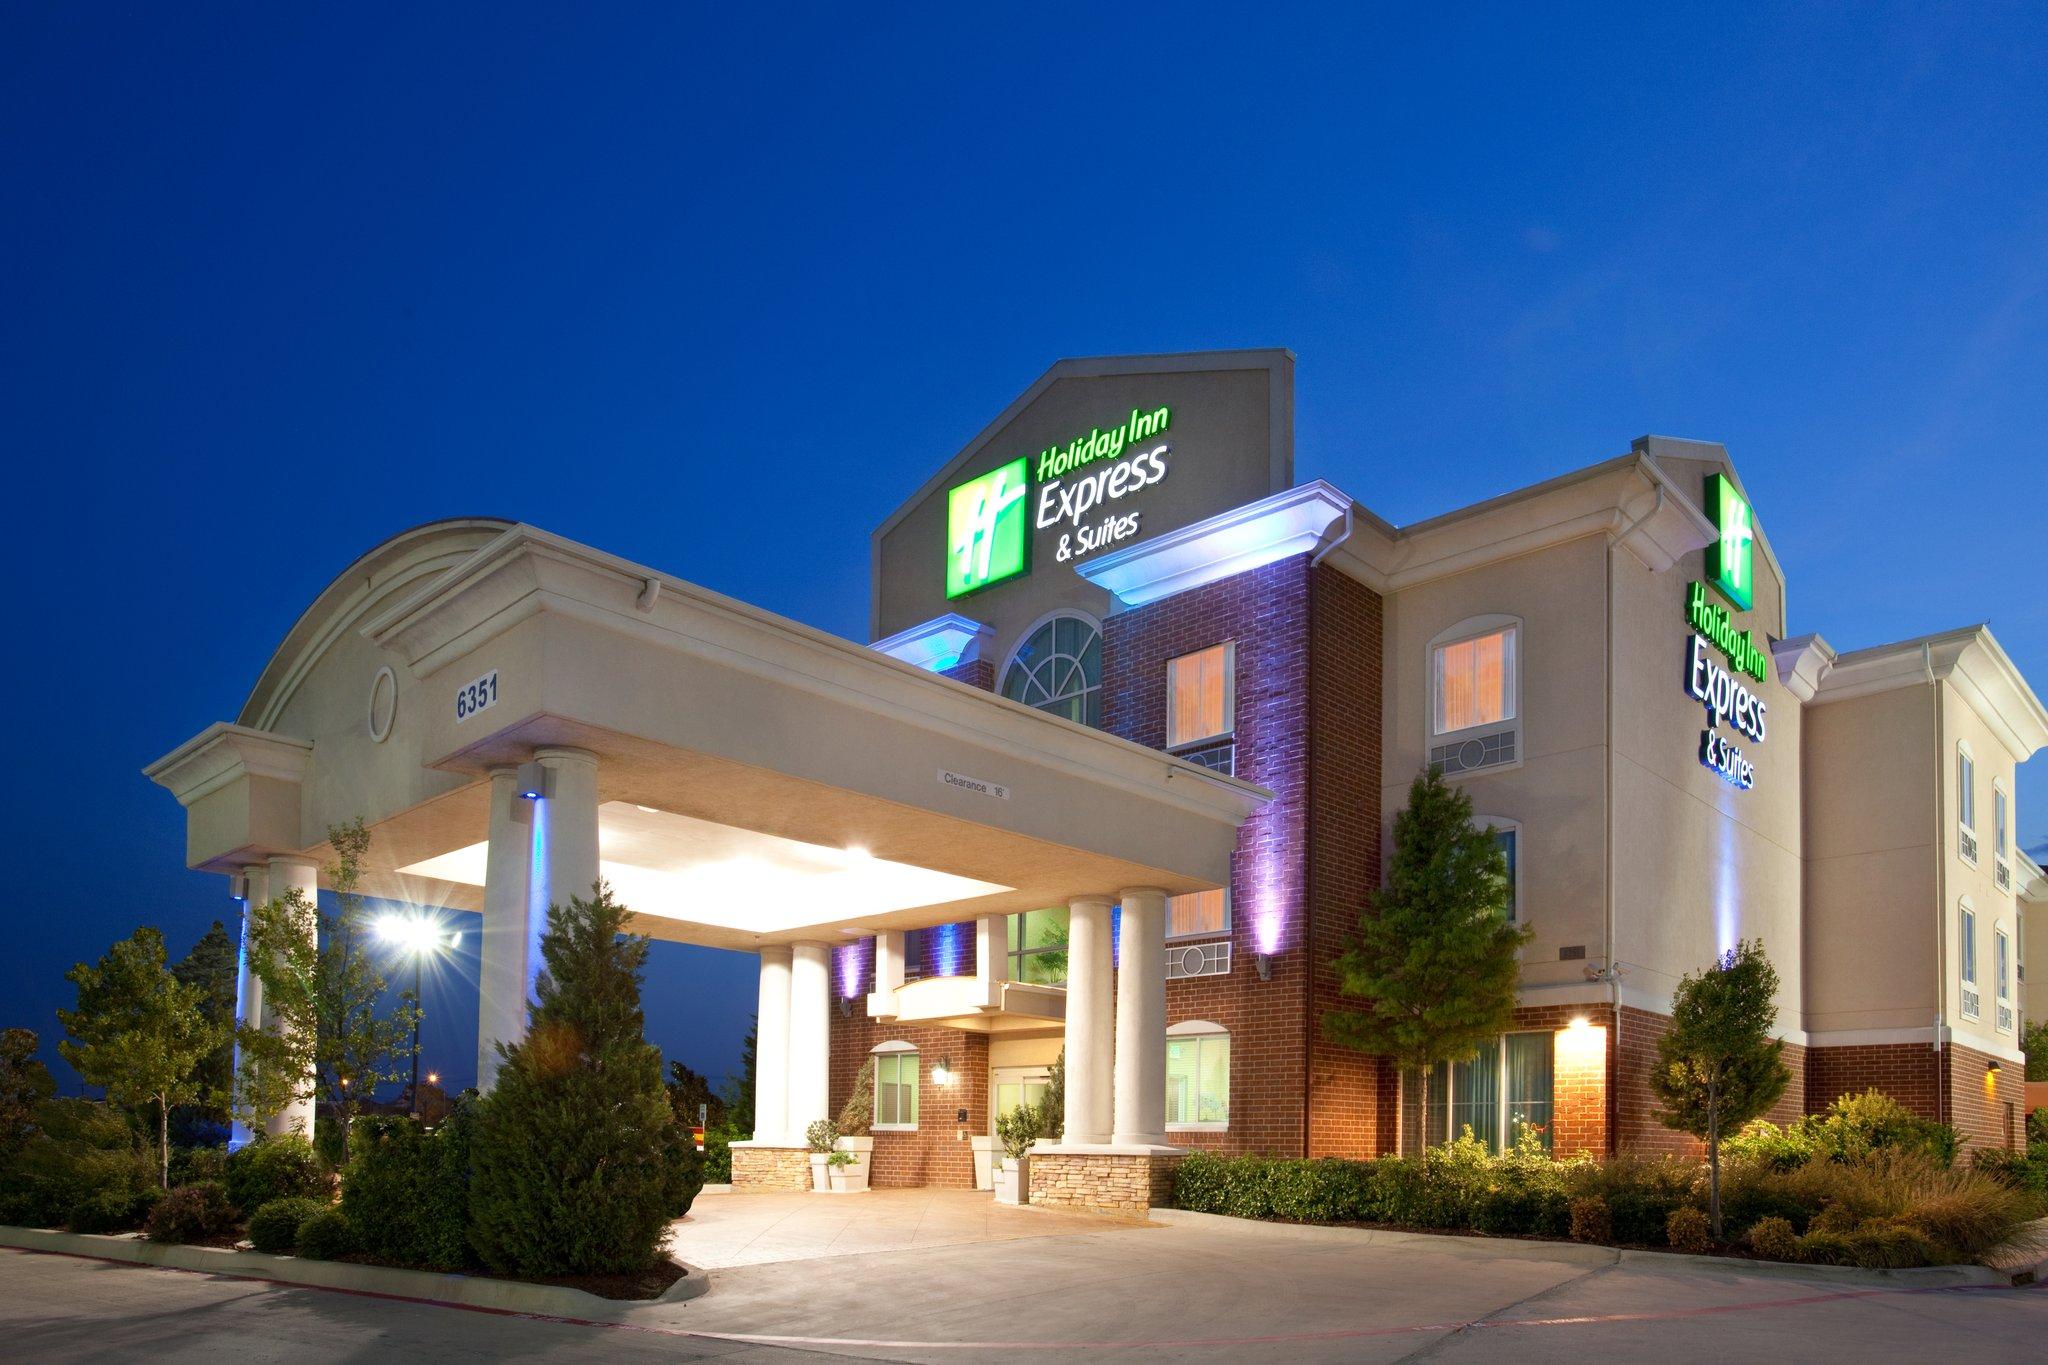 Holiday Inn Express Hotel & Suites Fort Worth I-35 Western Center in Fort Worth, TX